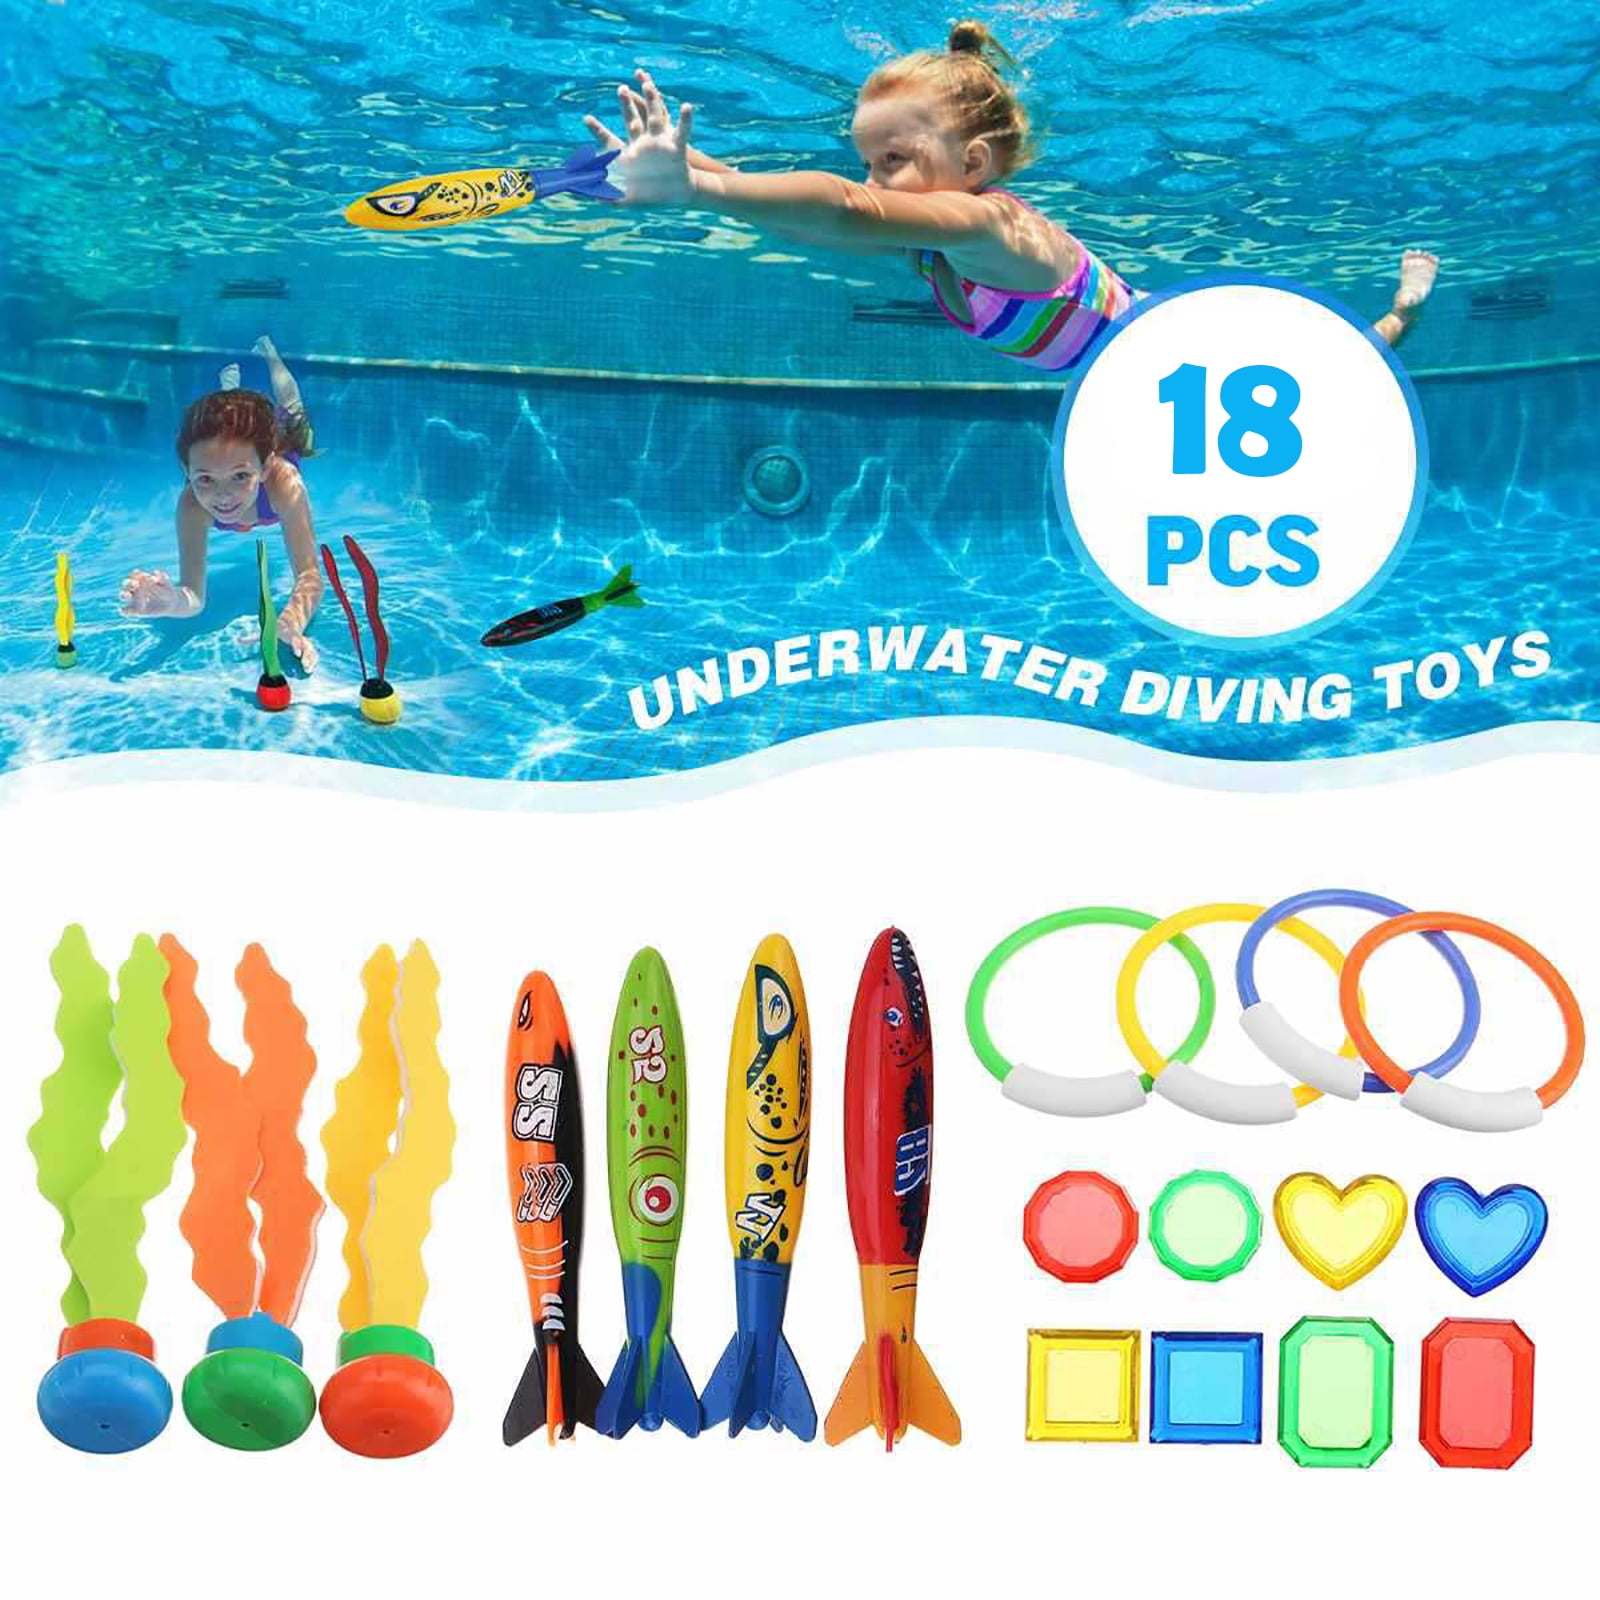 Monthlove Kid Dive Toys Pool Toys Underwater Swimming Toys Diving Torpedos Diving Rings Diving Gems Diving Sticks Diving Fish Puffer Fish with Under Water Treasures Gift Set 28PCS, B1 